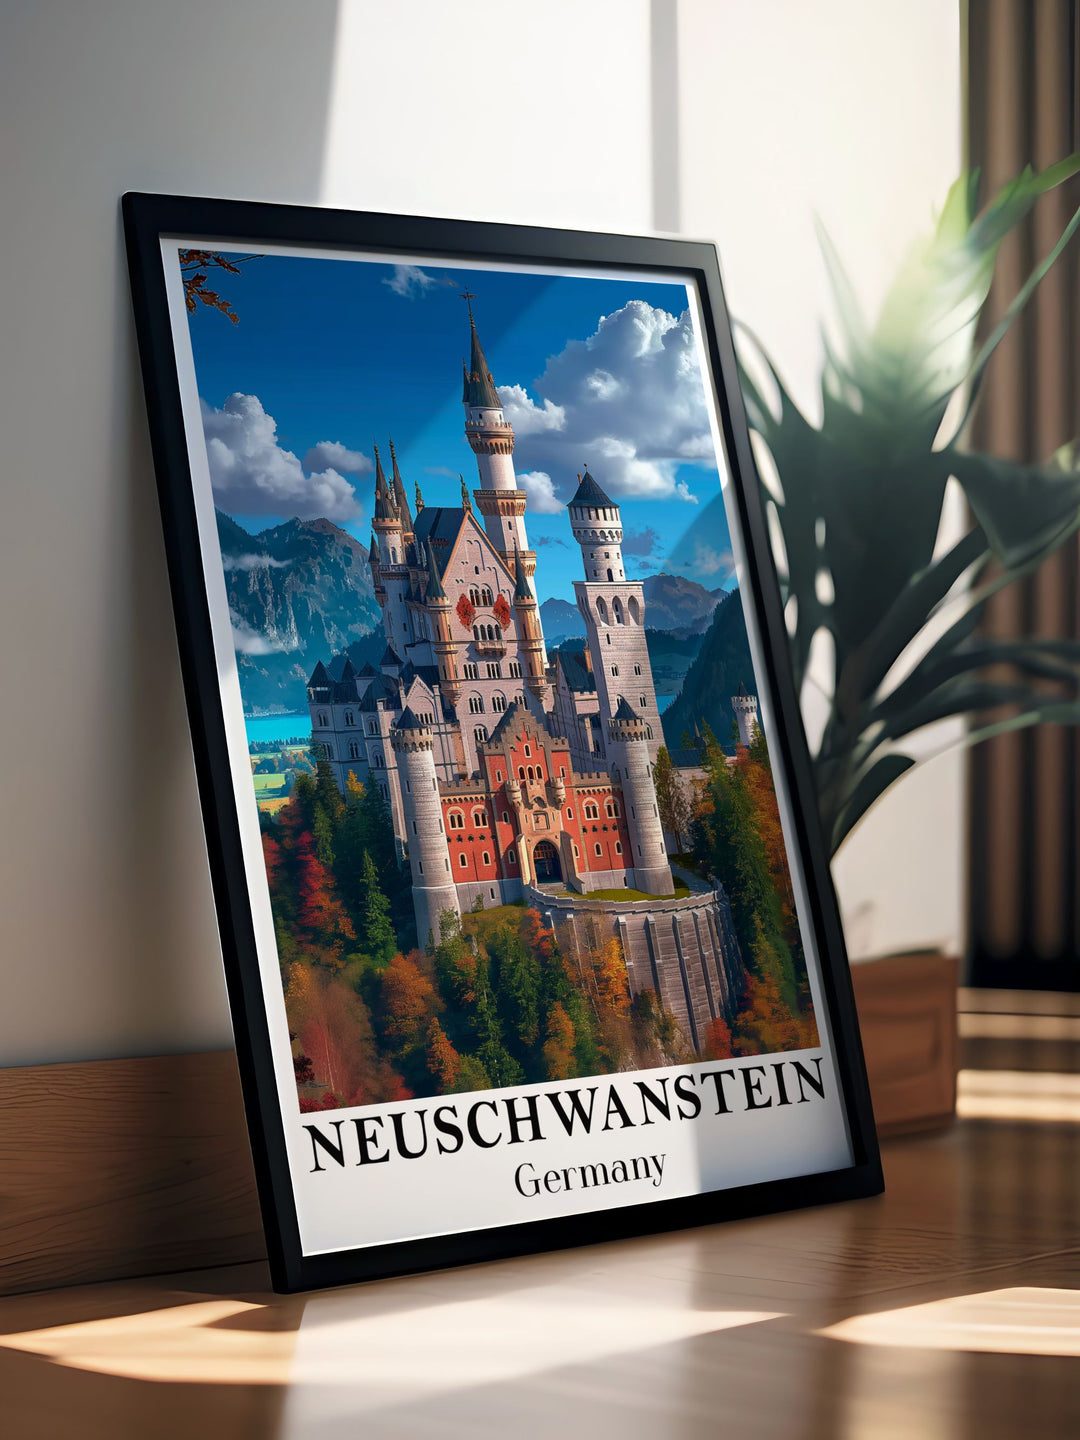 Neuschwanstein Castle gifts ideal for birthdays, anniversaries, and Christmas. This black and white design adds timeless charm and makes a thoughtful, elegant gift for loved ones.